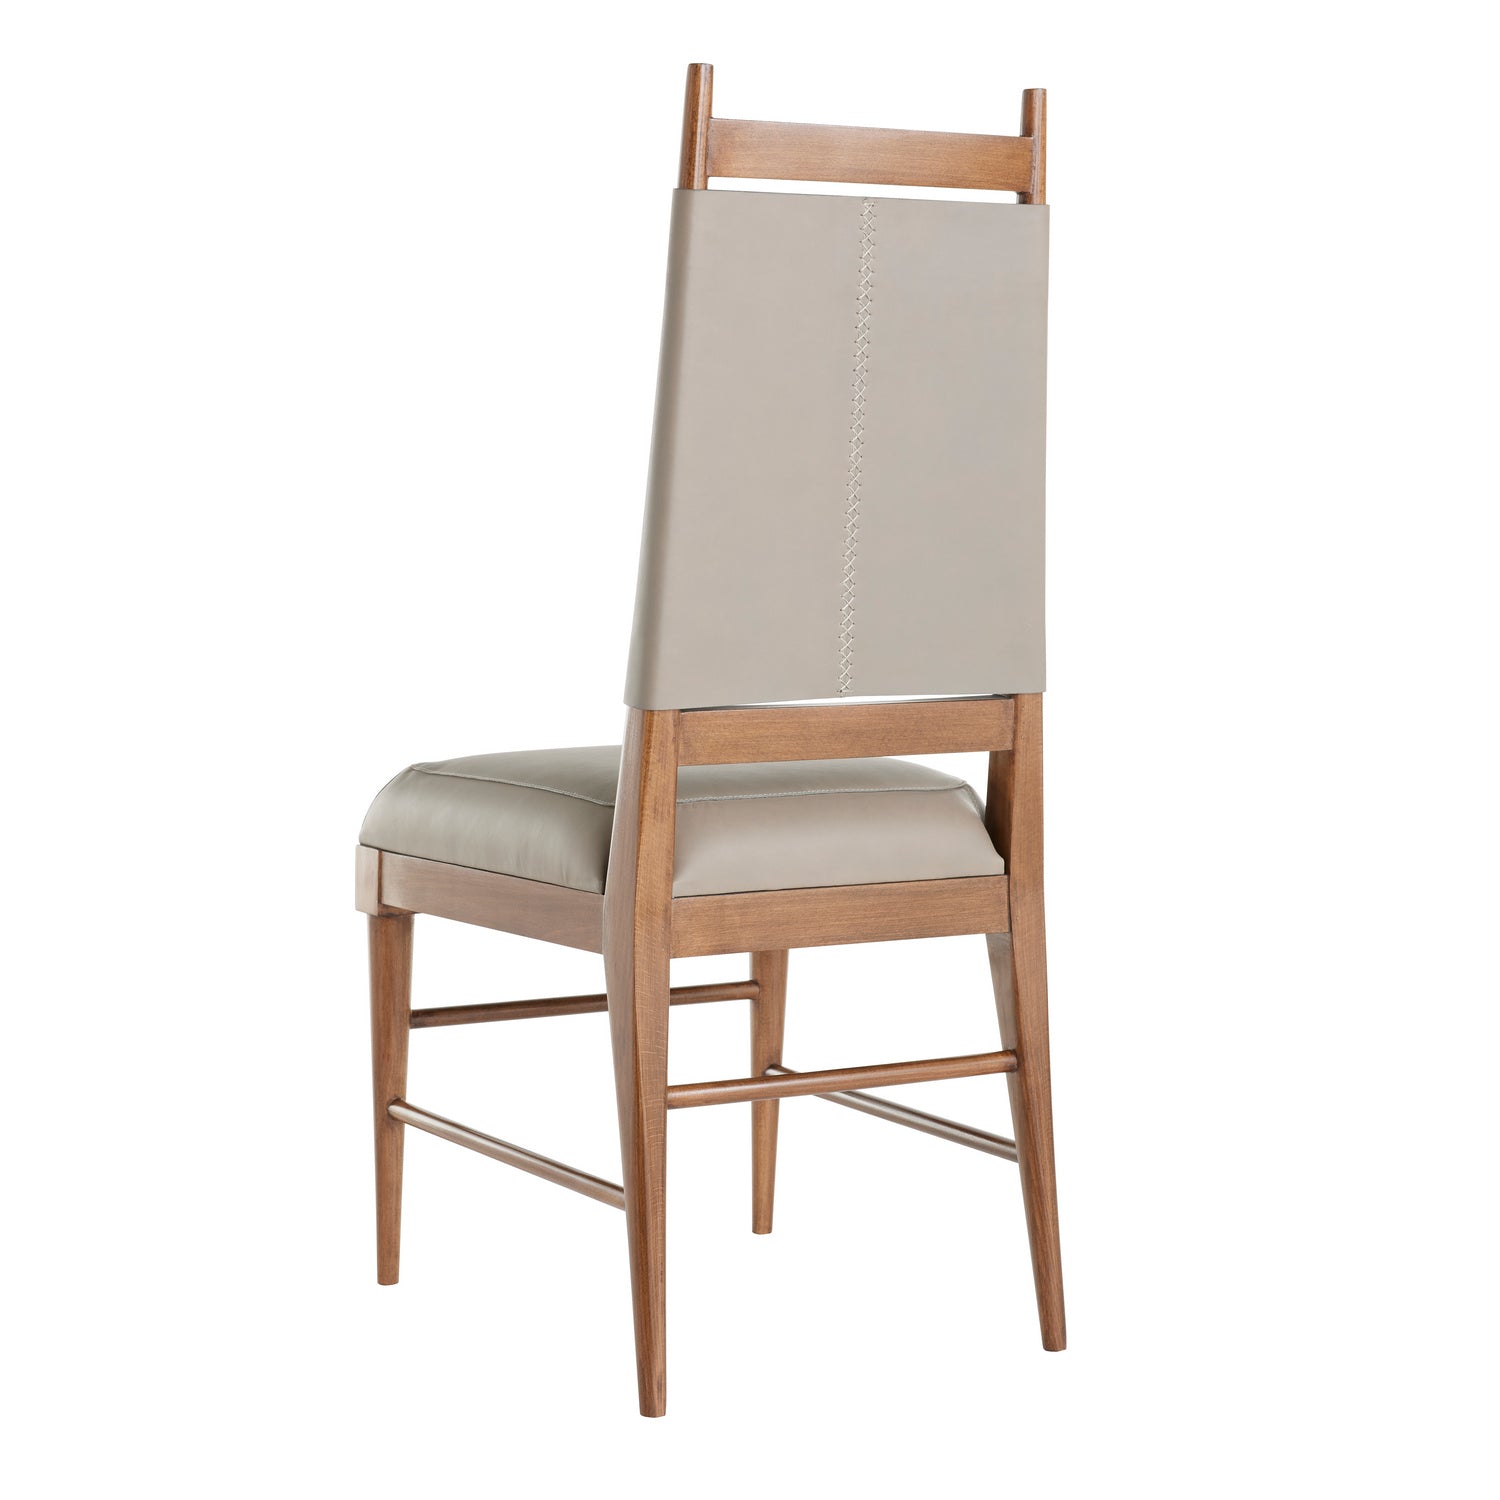 Chair from the Keegan collection in Morel finish